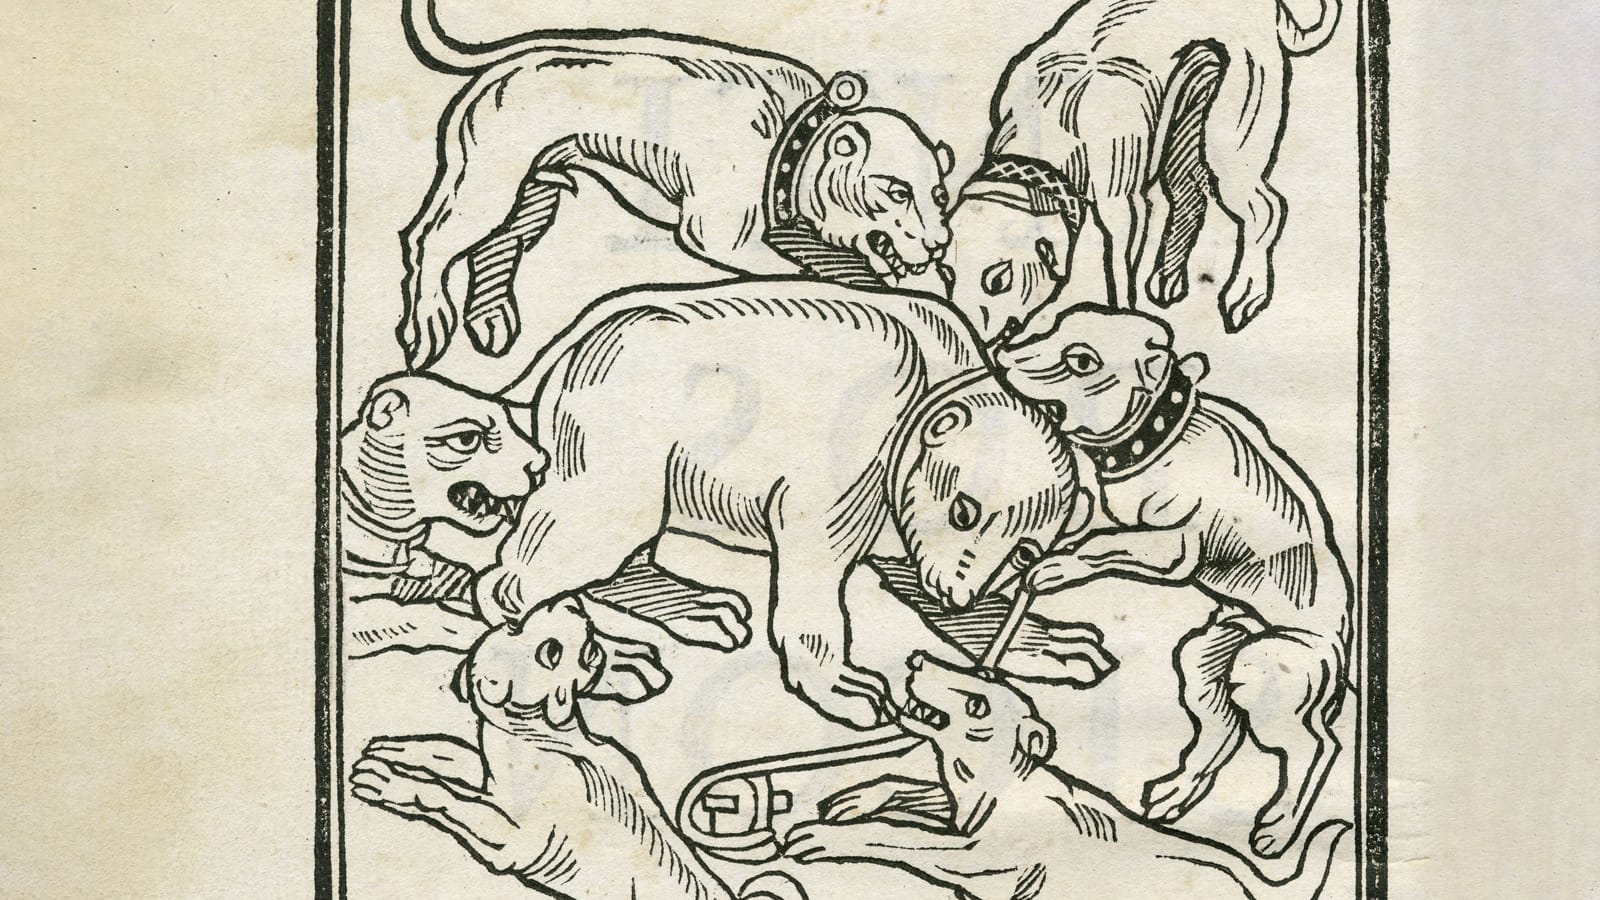 An illustration of dogs and bears